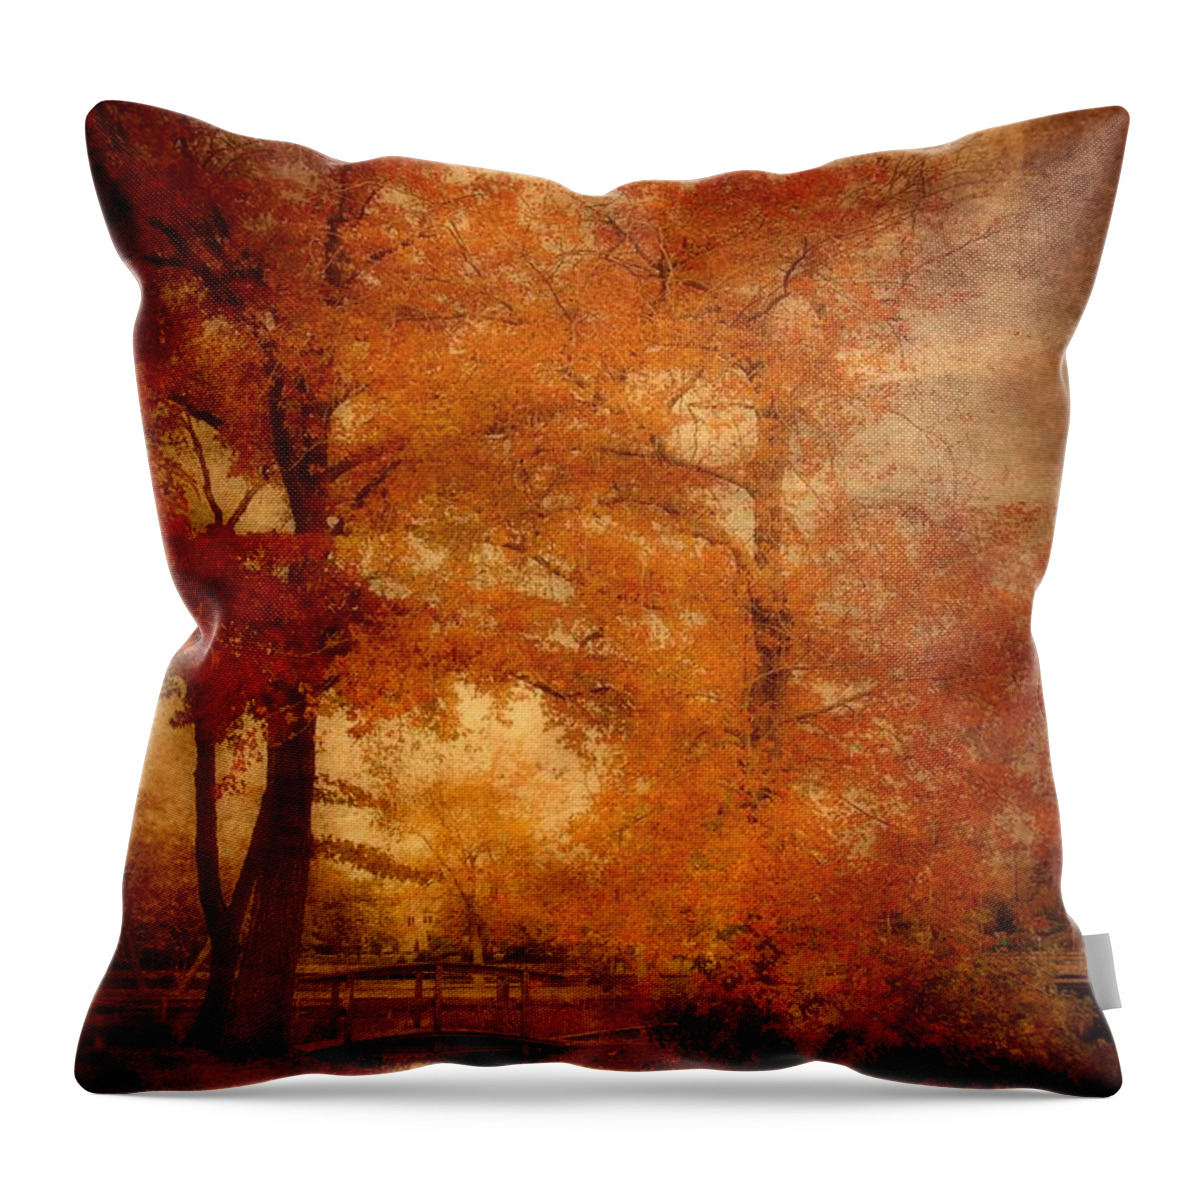 Autumn Landscapes Throw Pillow featuring the photograph Autumn Tapestry - Lake Carasaljo by Angie Tirado